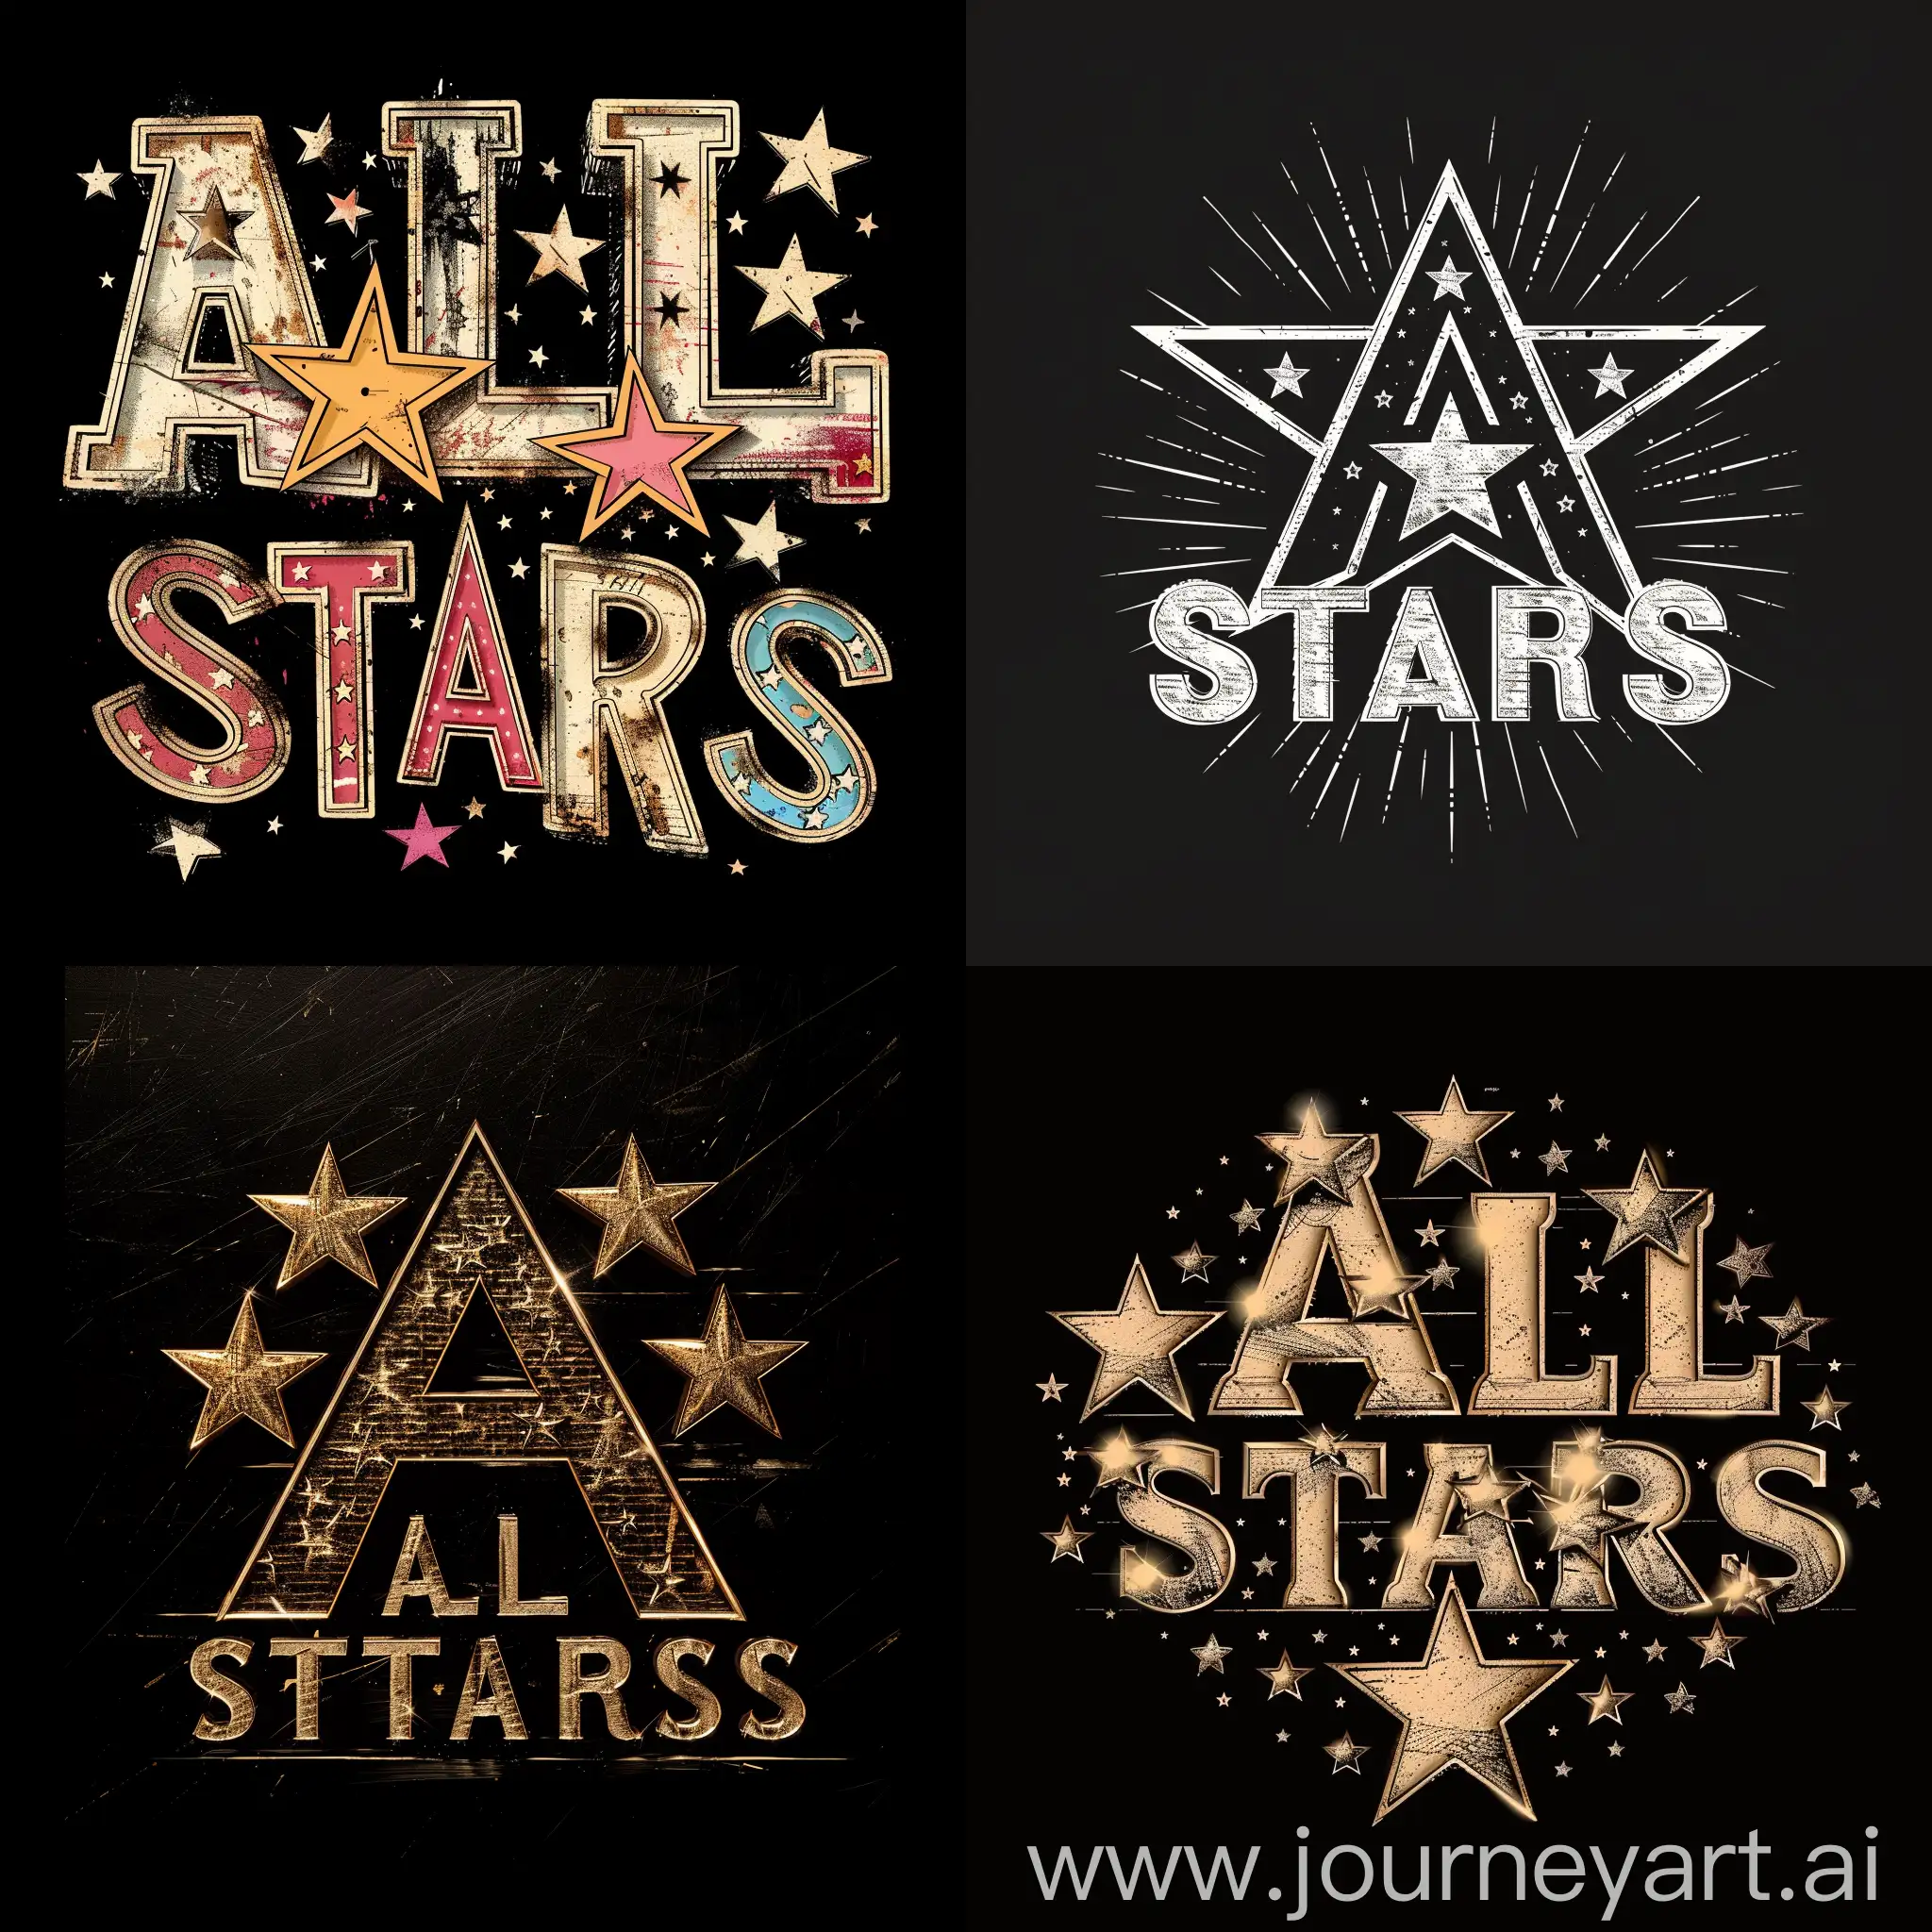 the inscription "ALL STARS" on a black background. There should be a star in the letter "A"